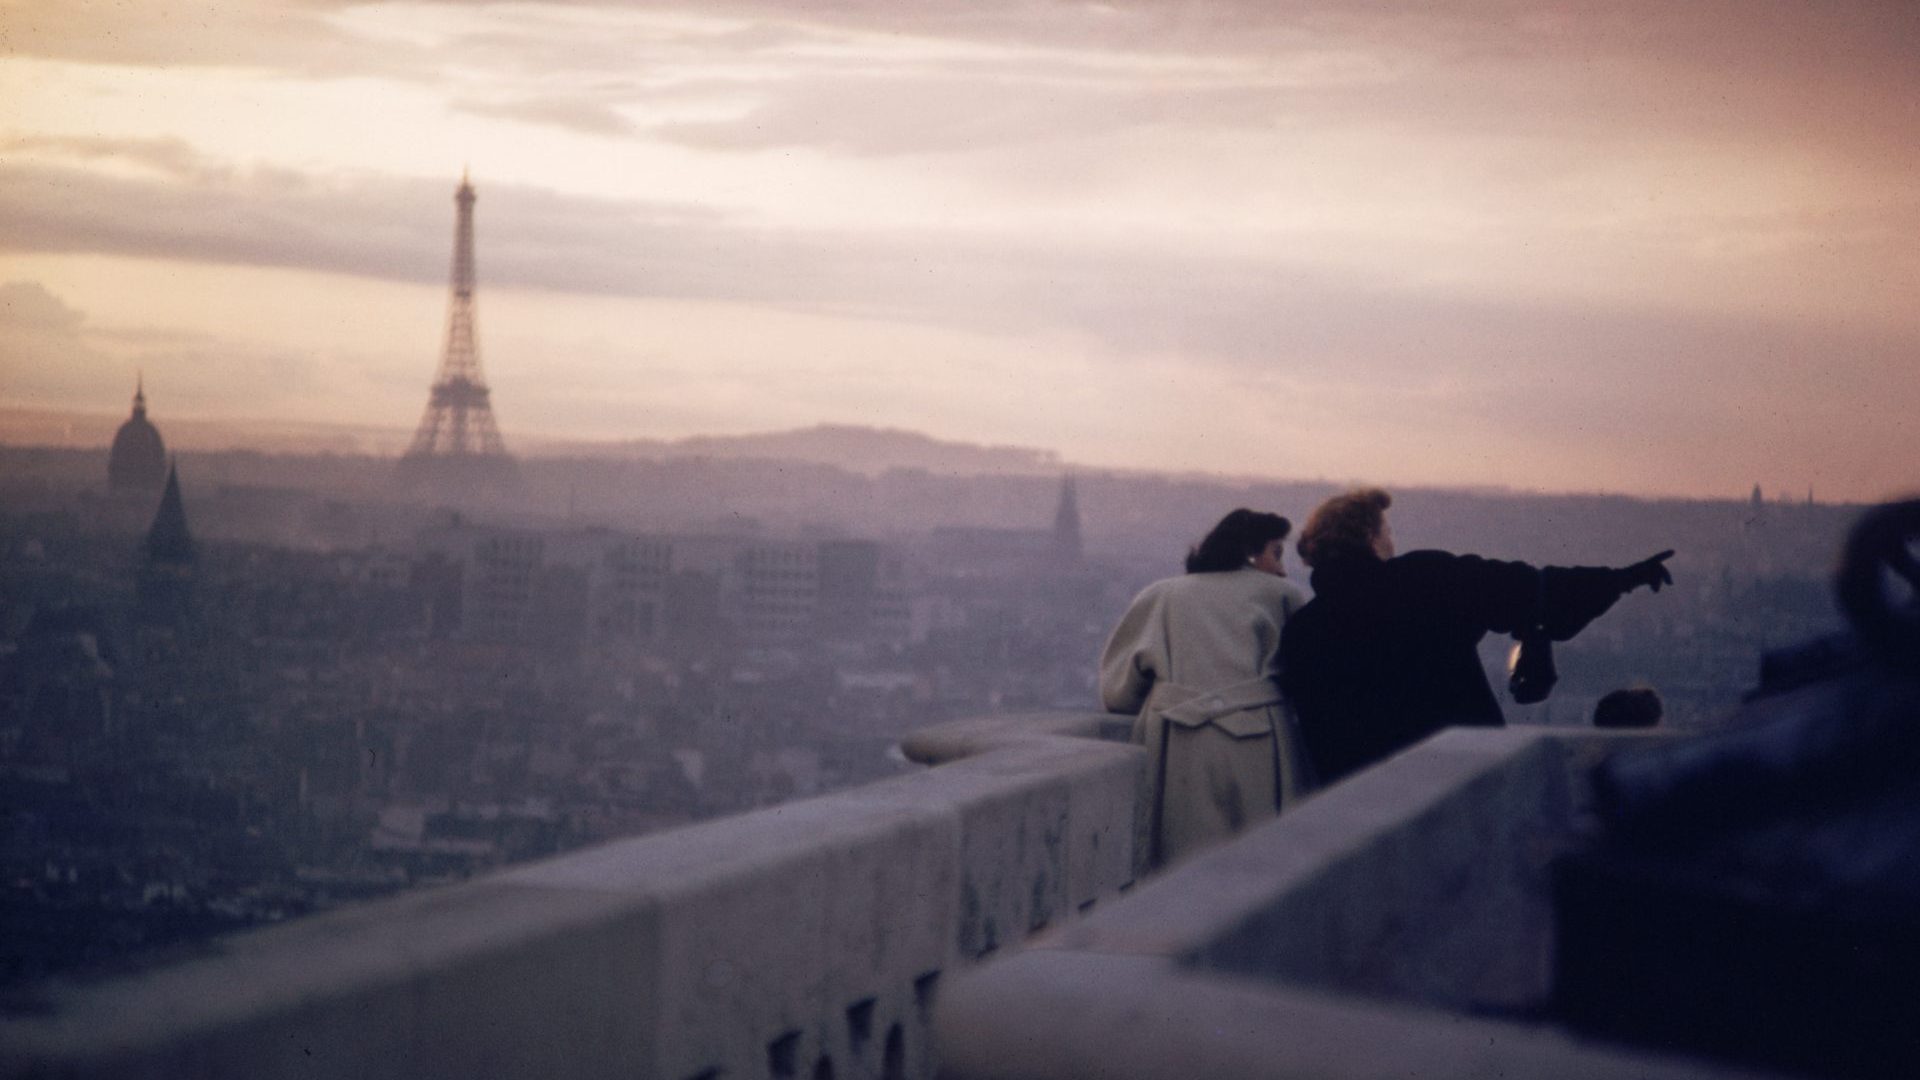 The view from Nôtre-Dame towards the Eiffel Tower, taken in the mid-1950s, when the photographer returned to Paris from New York on assignment. All photos: Ernst Haas/Getty